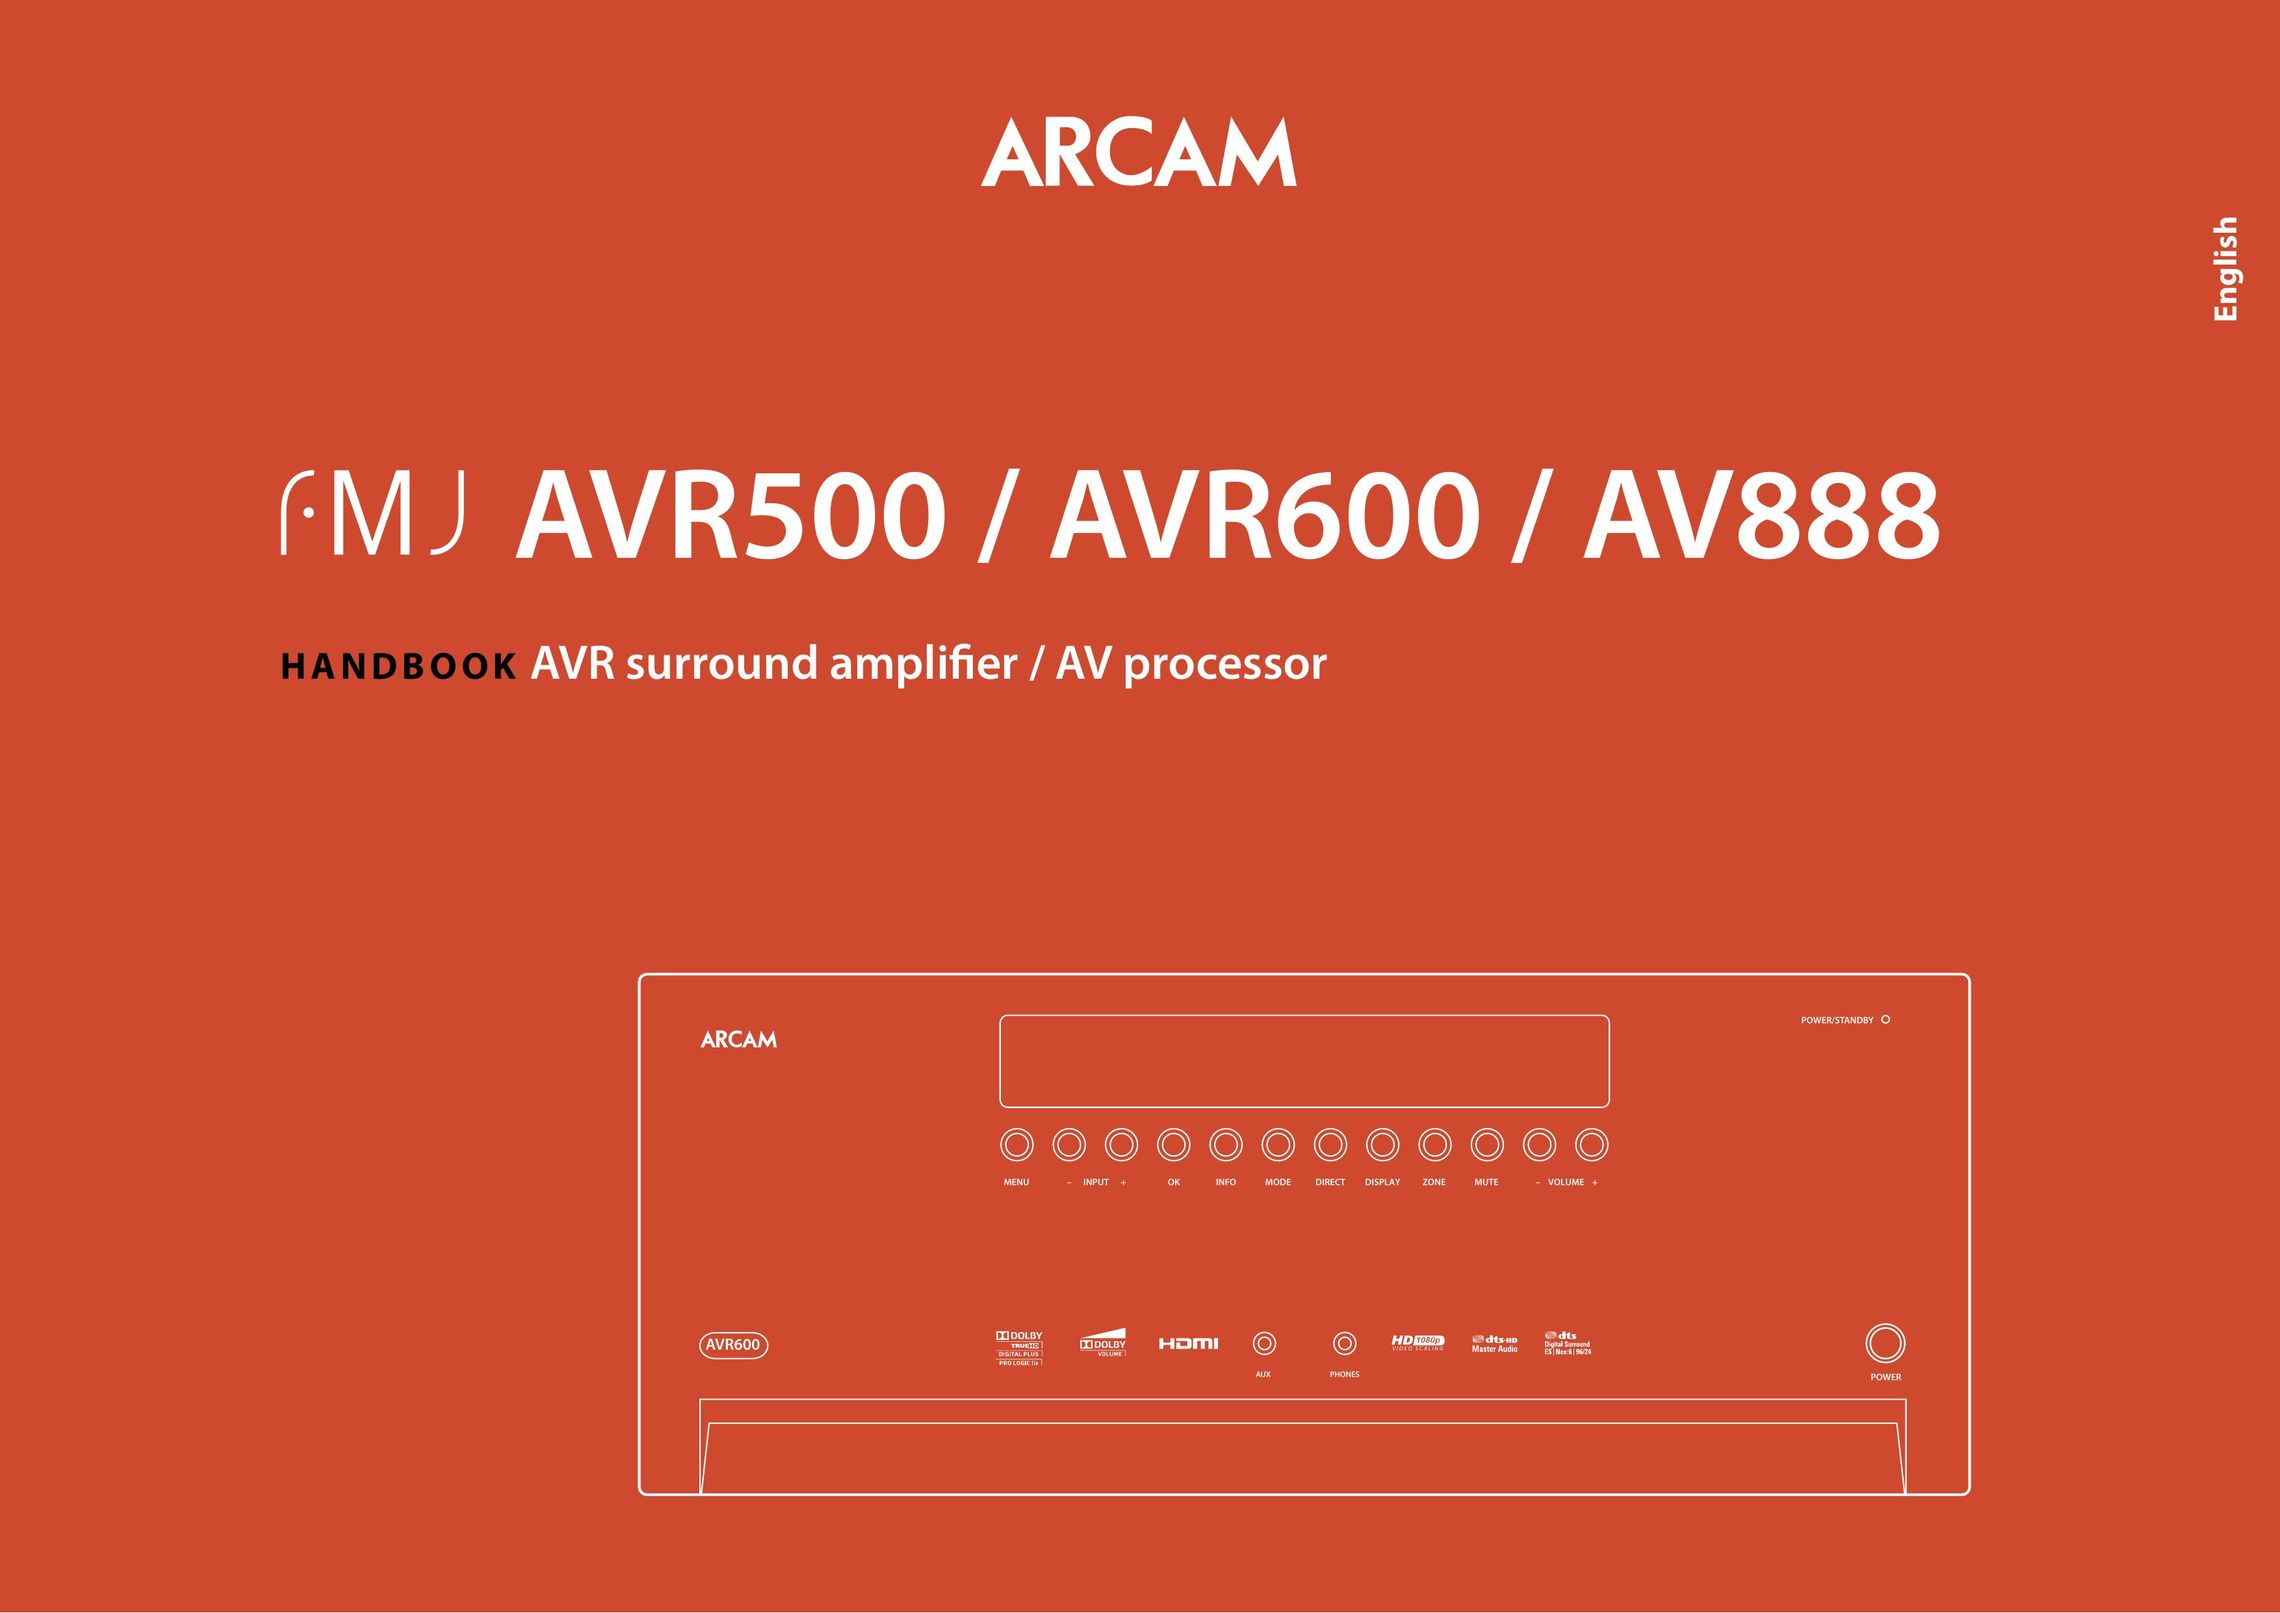 Arcam AVR500 Home Theater System User Manual